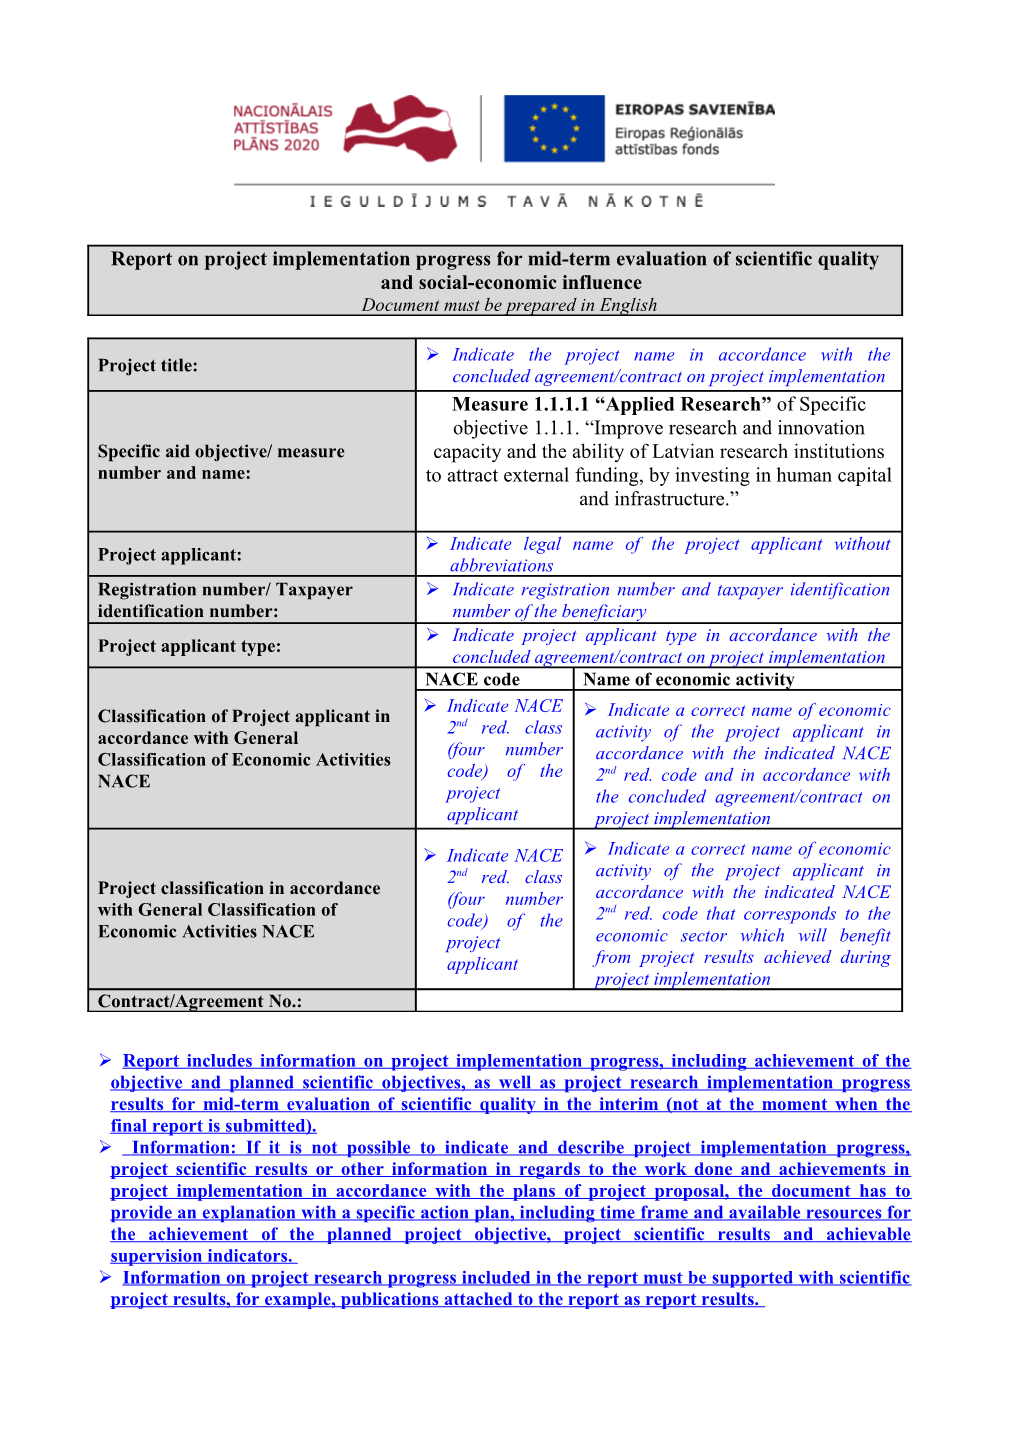 Report on Project Implementation Progress for Mid-Term Evaluation of Scientific Quality